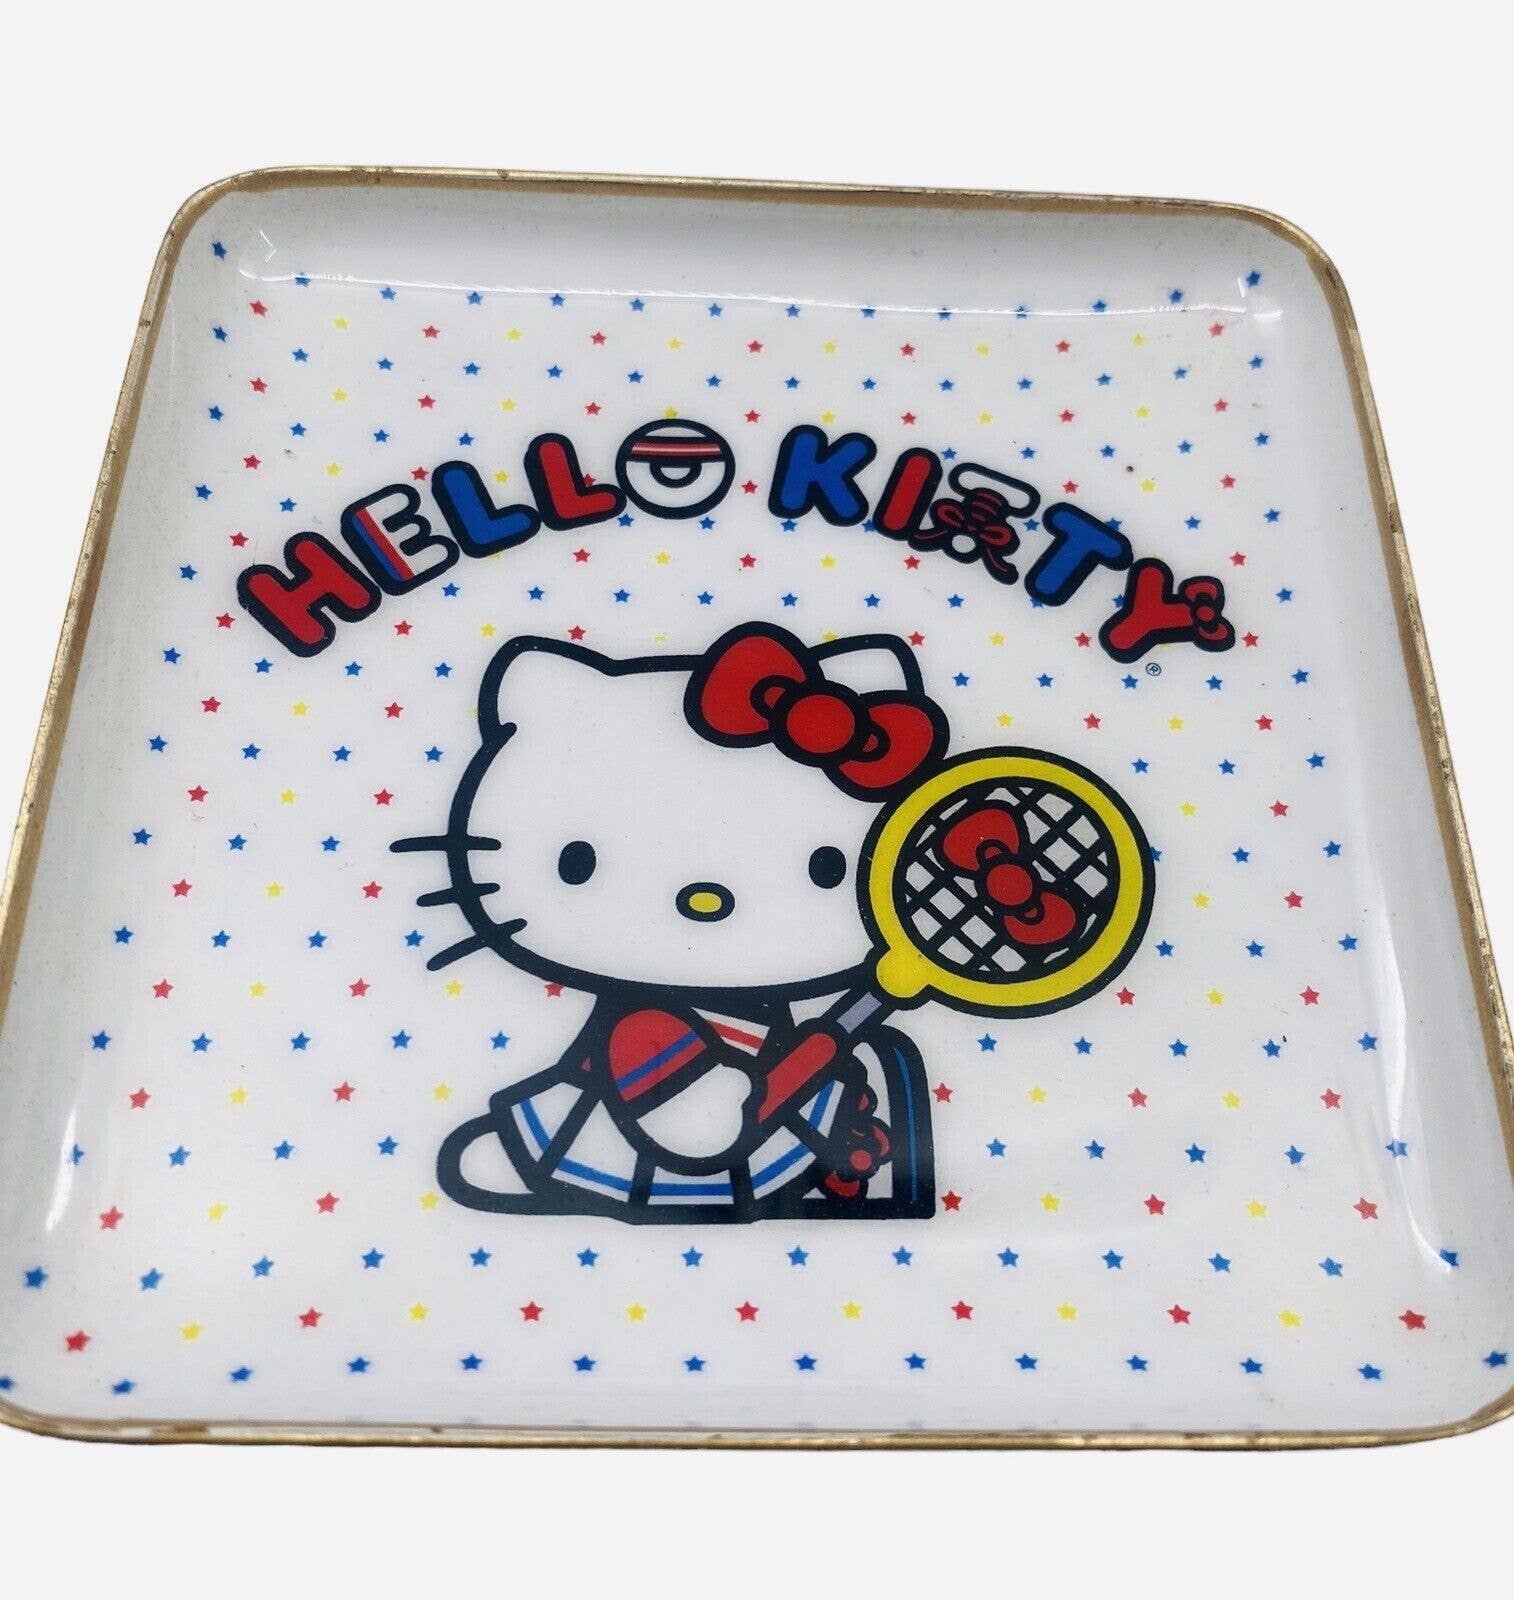 Primary image for Sanrio Hello Kitty Tennis Outfit Ceramic Metal Plate Dish 4" x 4" Vintage